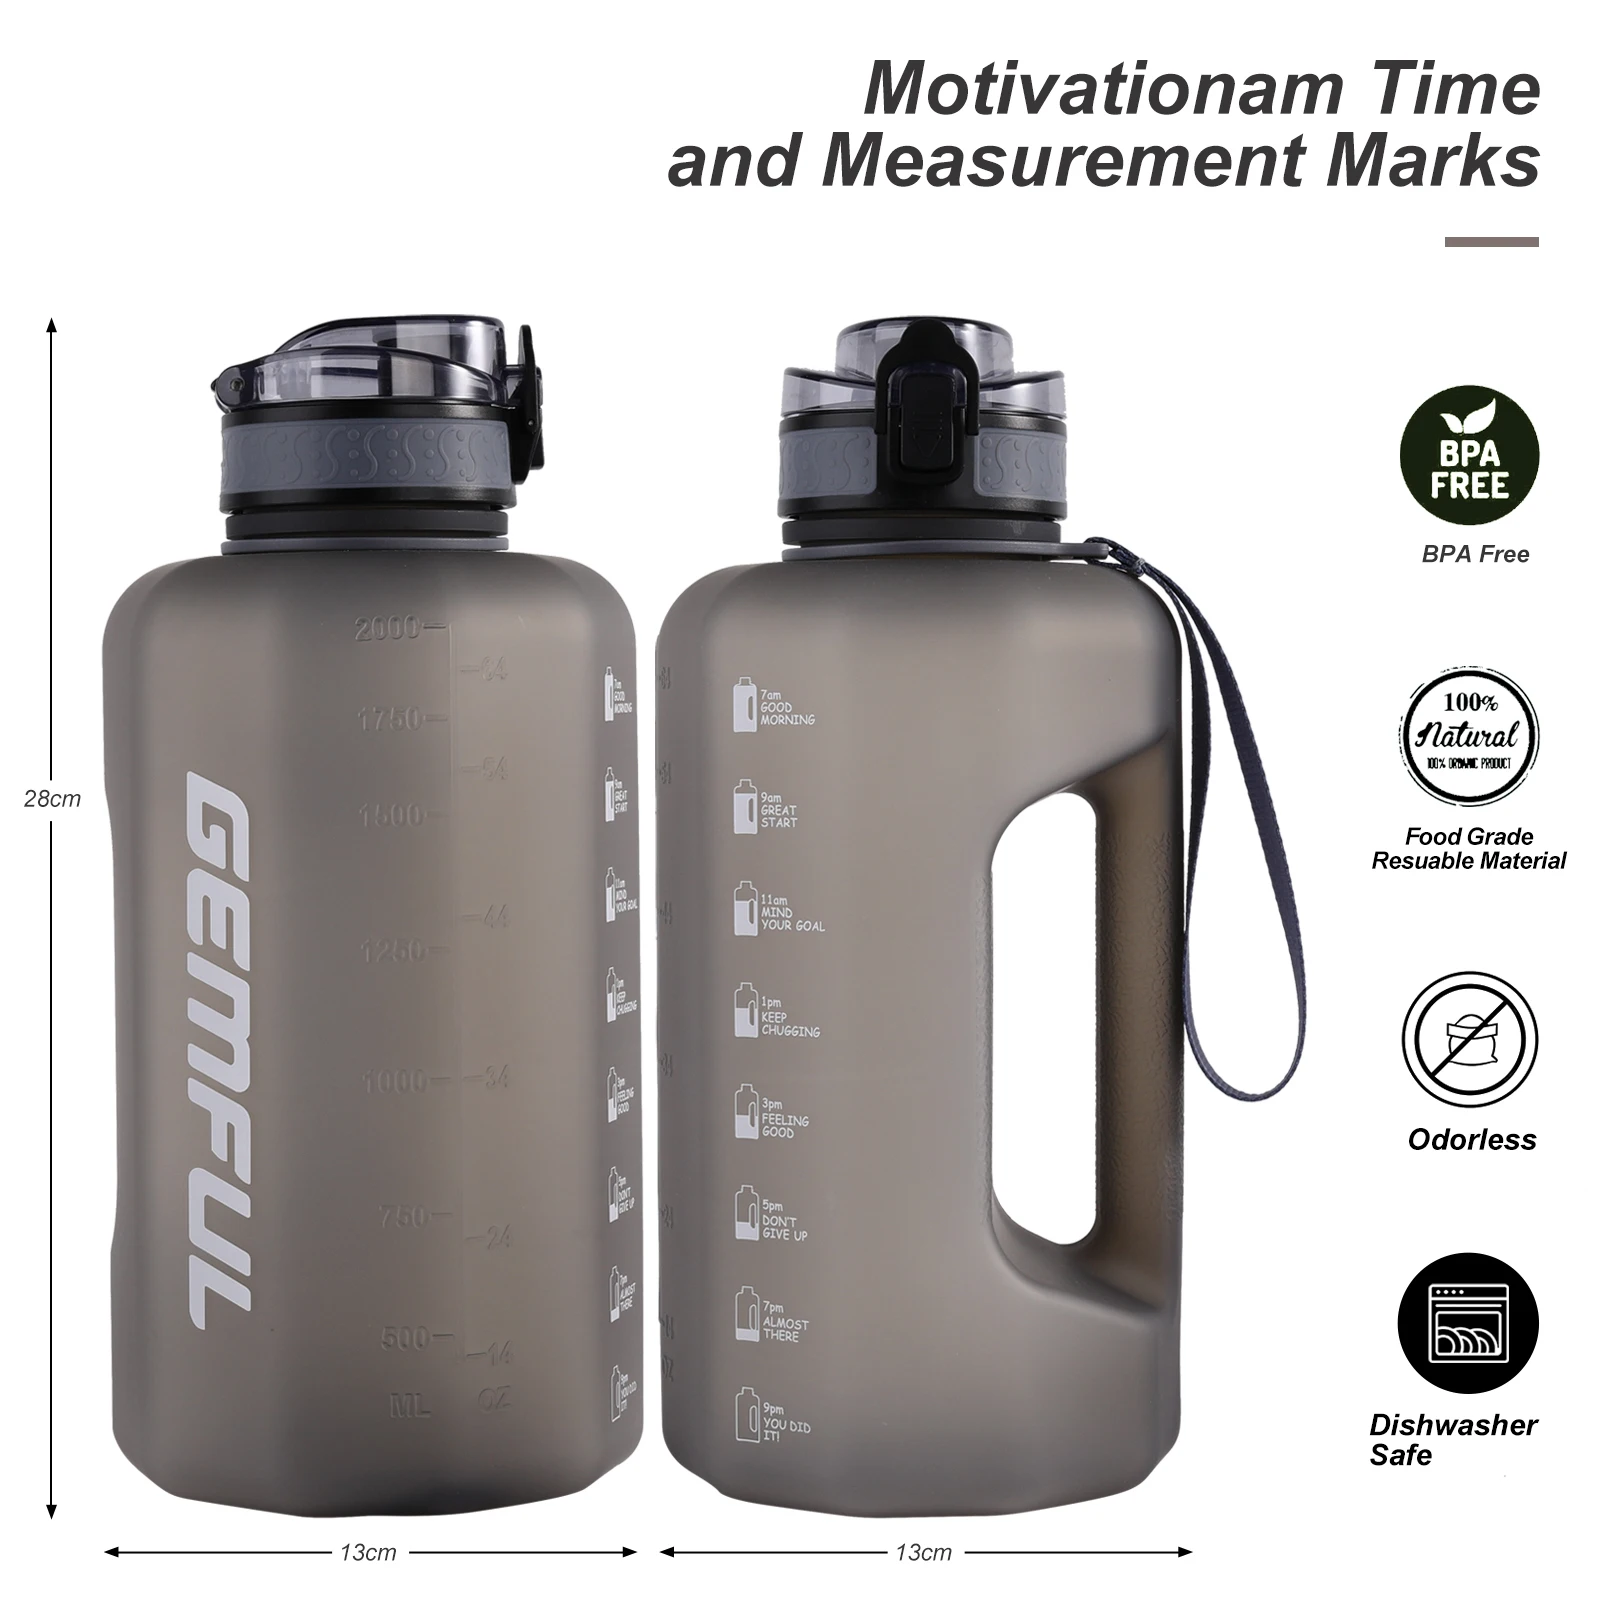 https://ae01.alicdn.com/kf/Sdb55fc5d5a3c4a82ba698d1ce585c81aW/Large-73oz-Sports-Water-Bottle-with-Silicone-Straw-Motivational-Time-Marker-Scale-BPA-Free-Portable-2.jpg